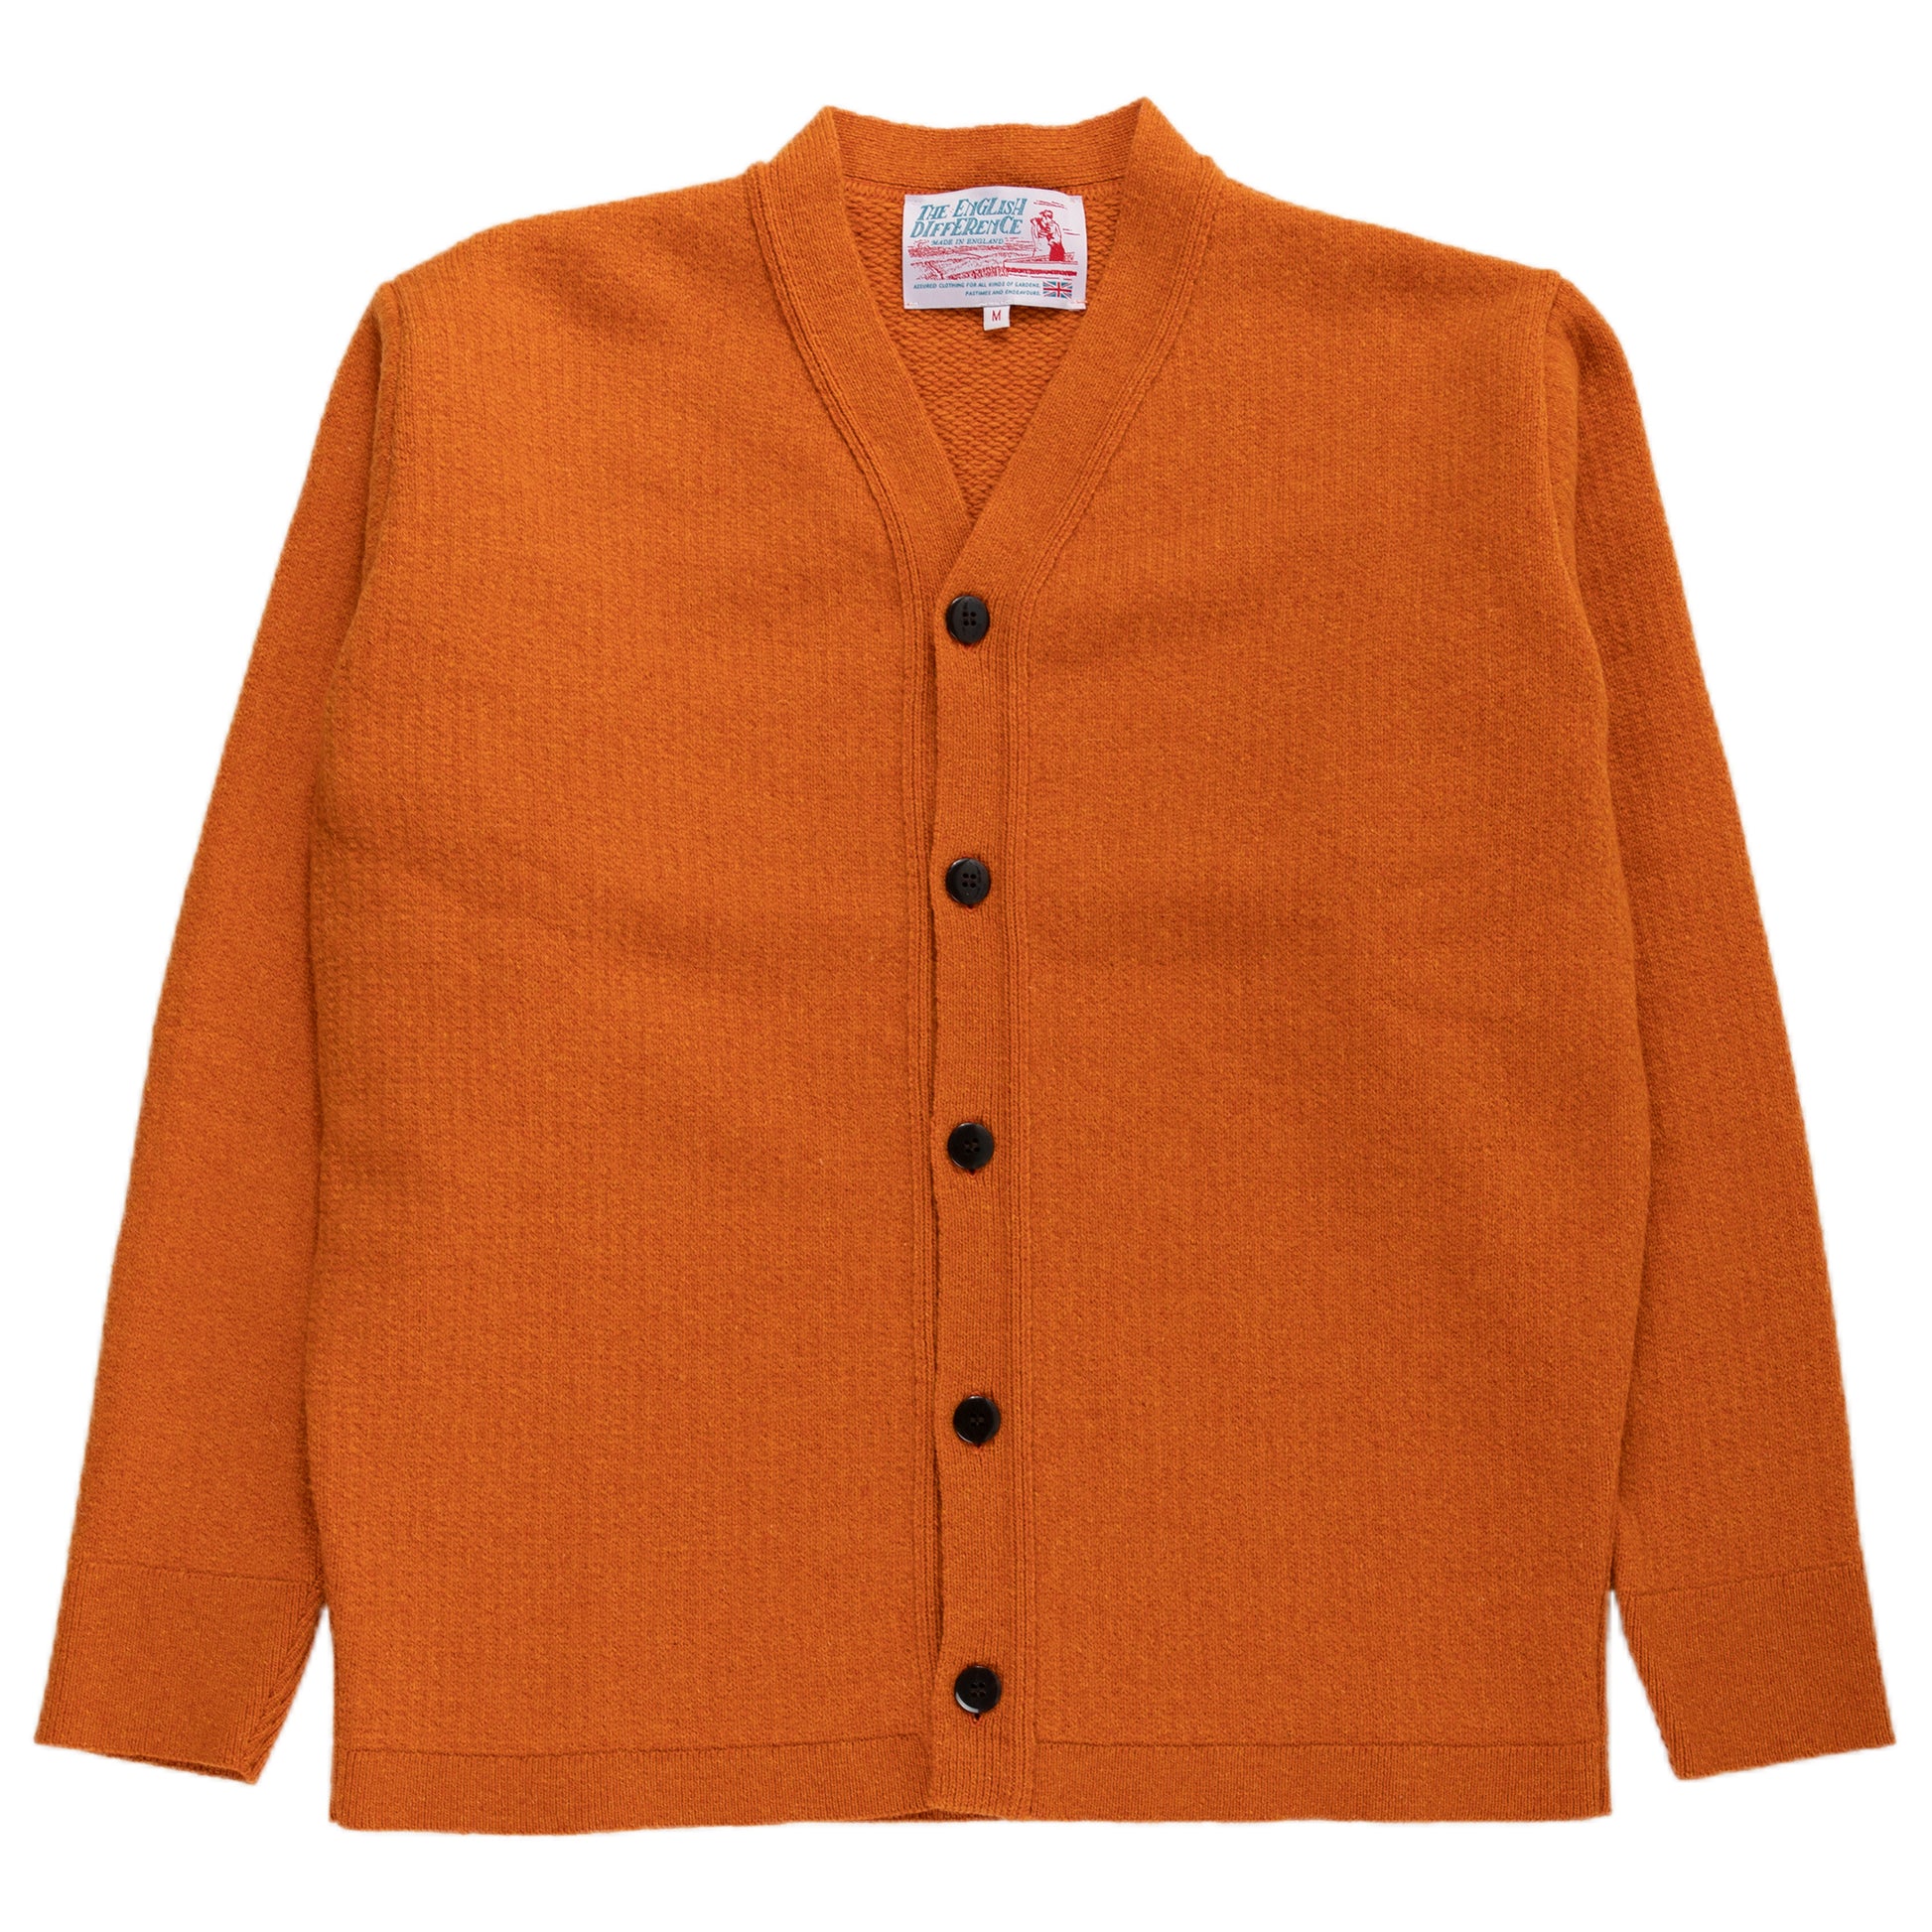 The English Difference Cardigan in Orange by Garbstore